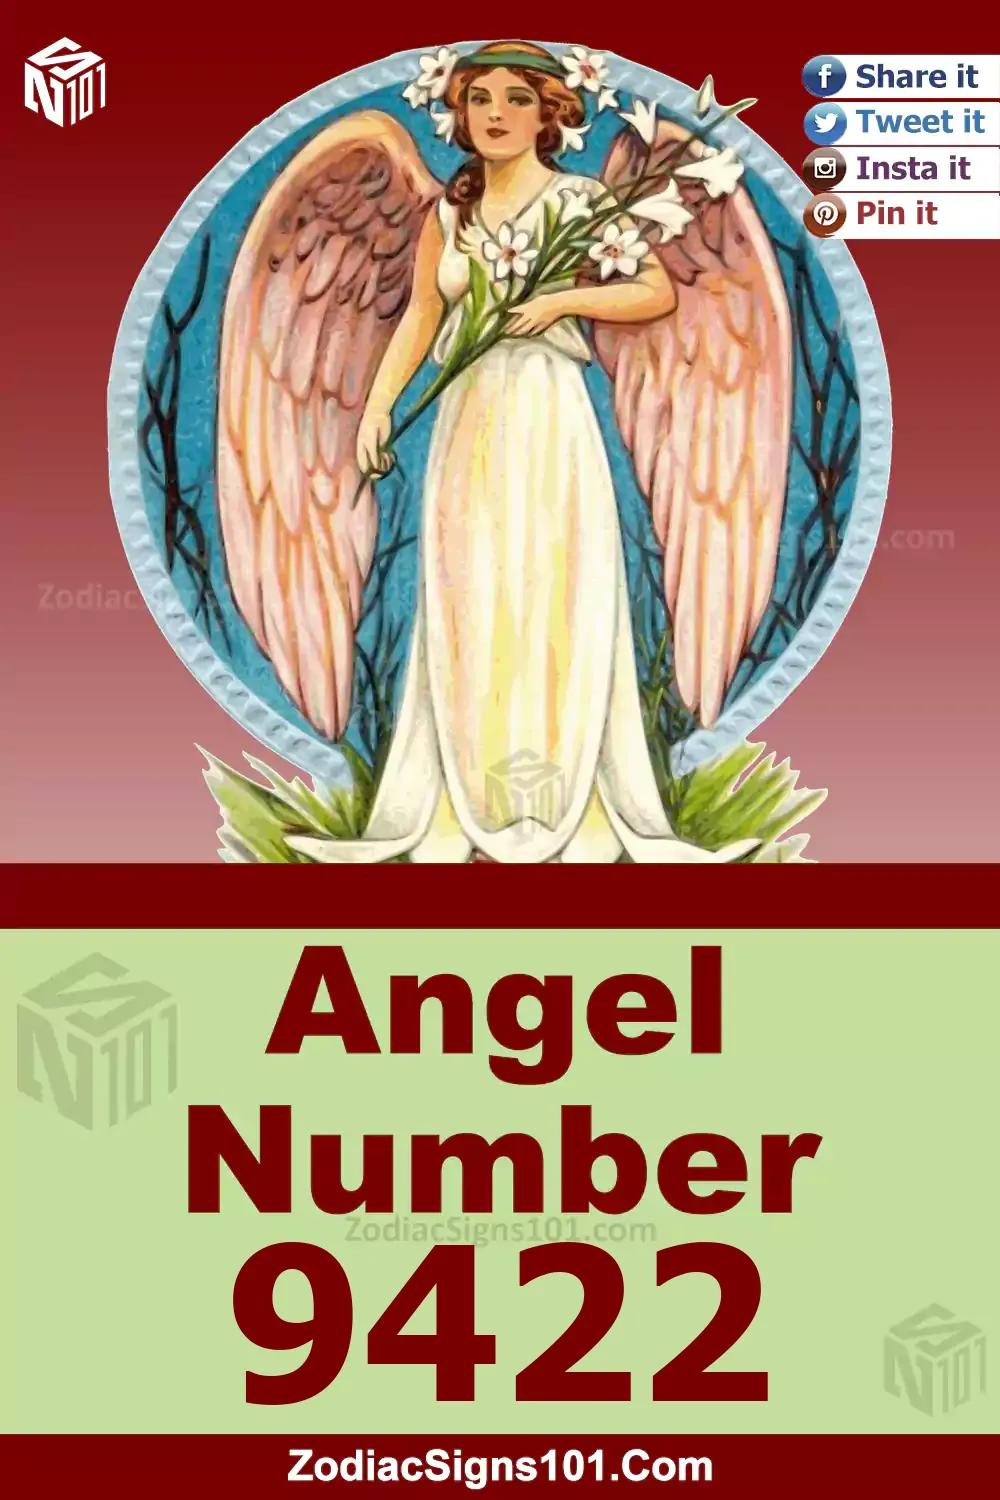 9422 Angel Number Meaning